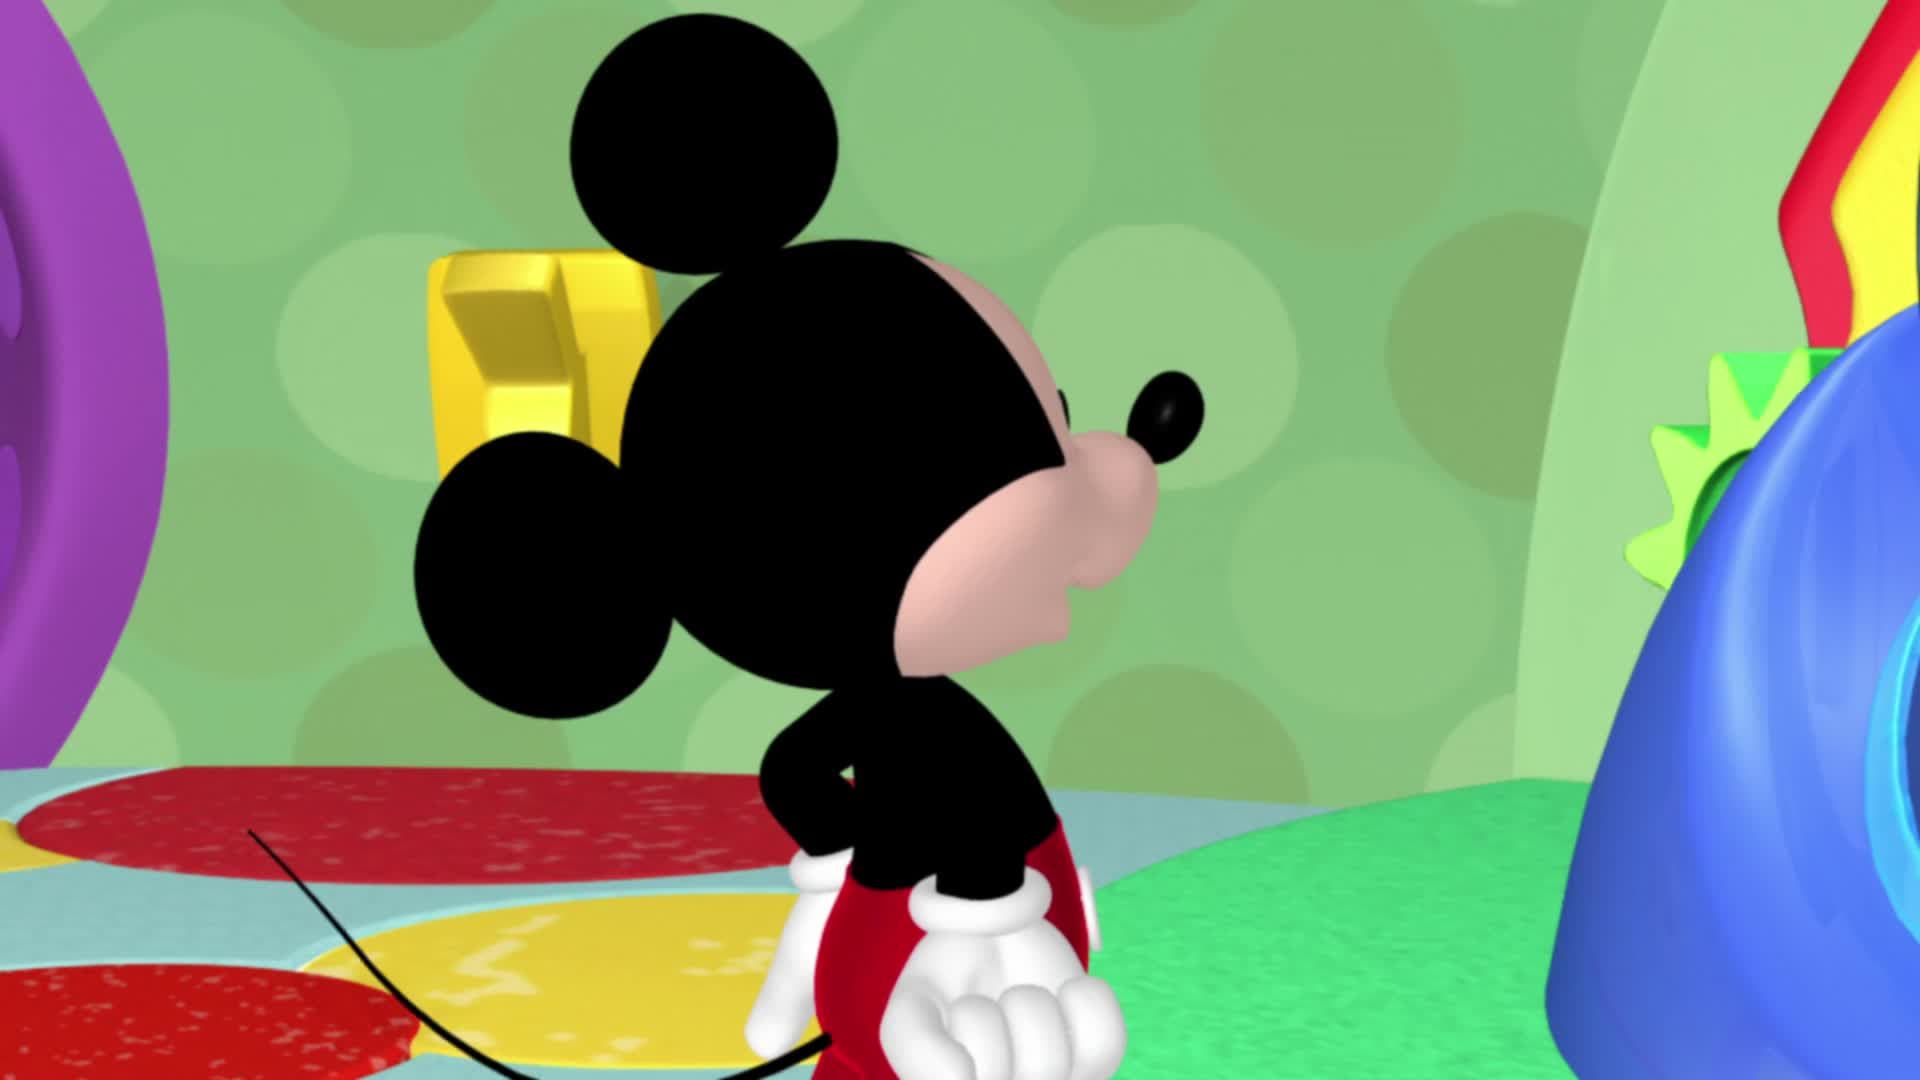 Pluto's Ball, S1 E12, Full Episode, Mickey Mouse Clubhouse